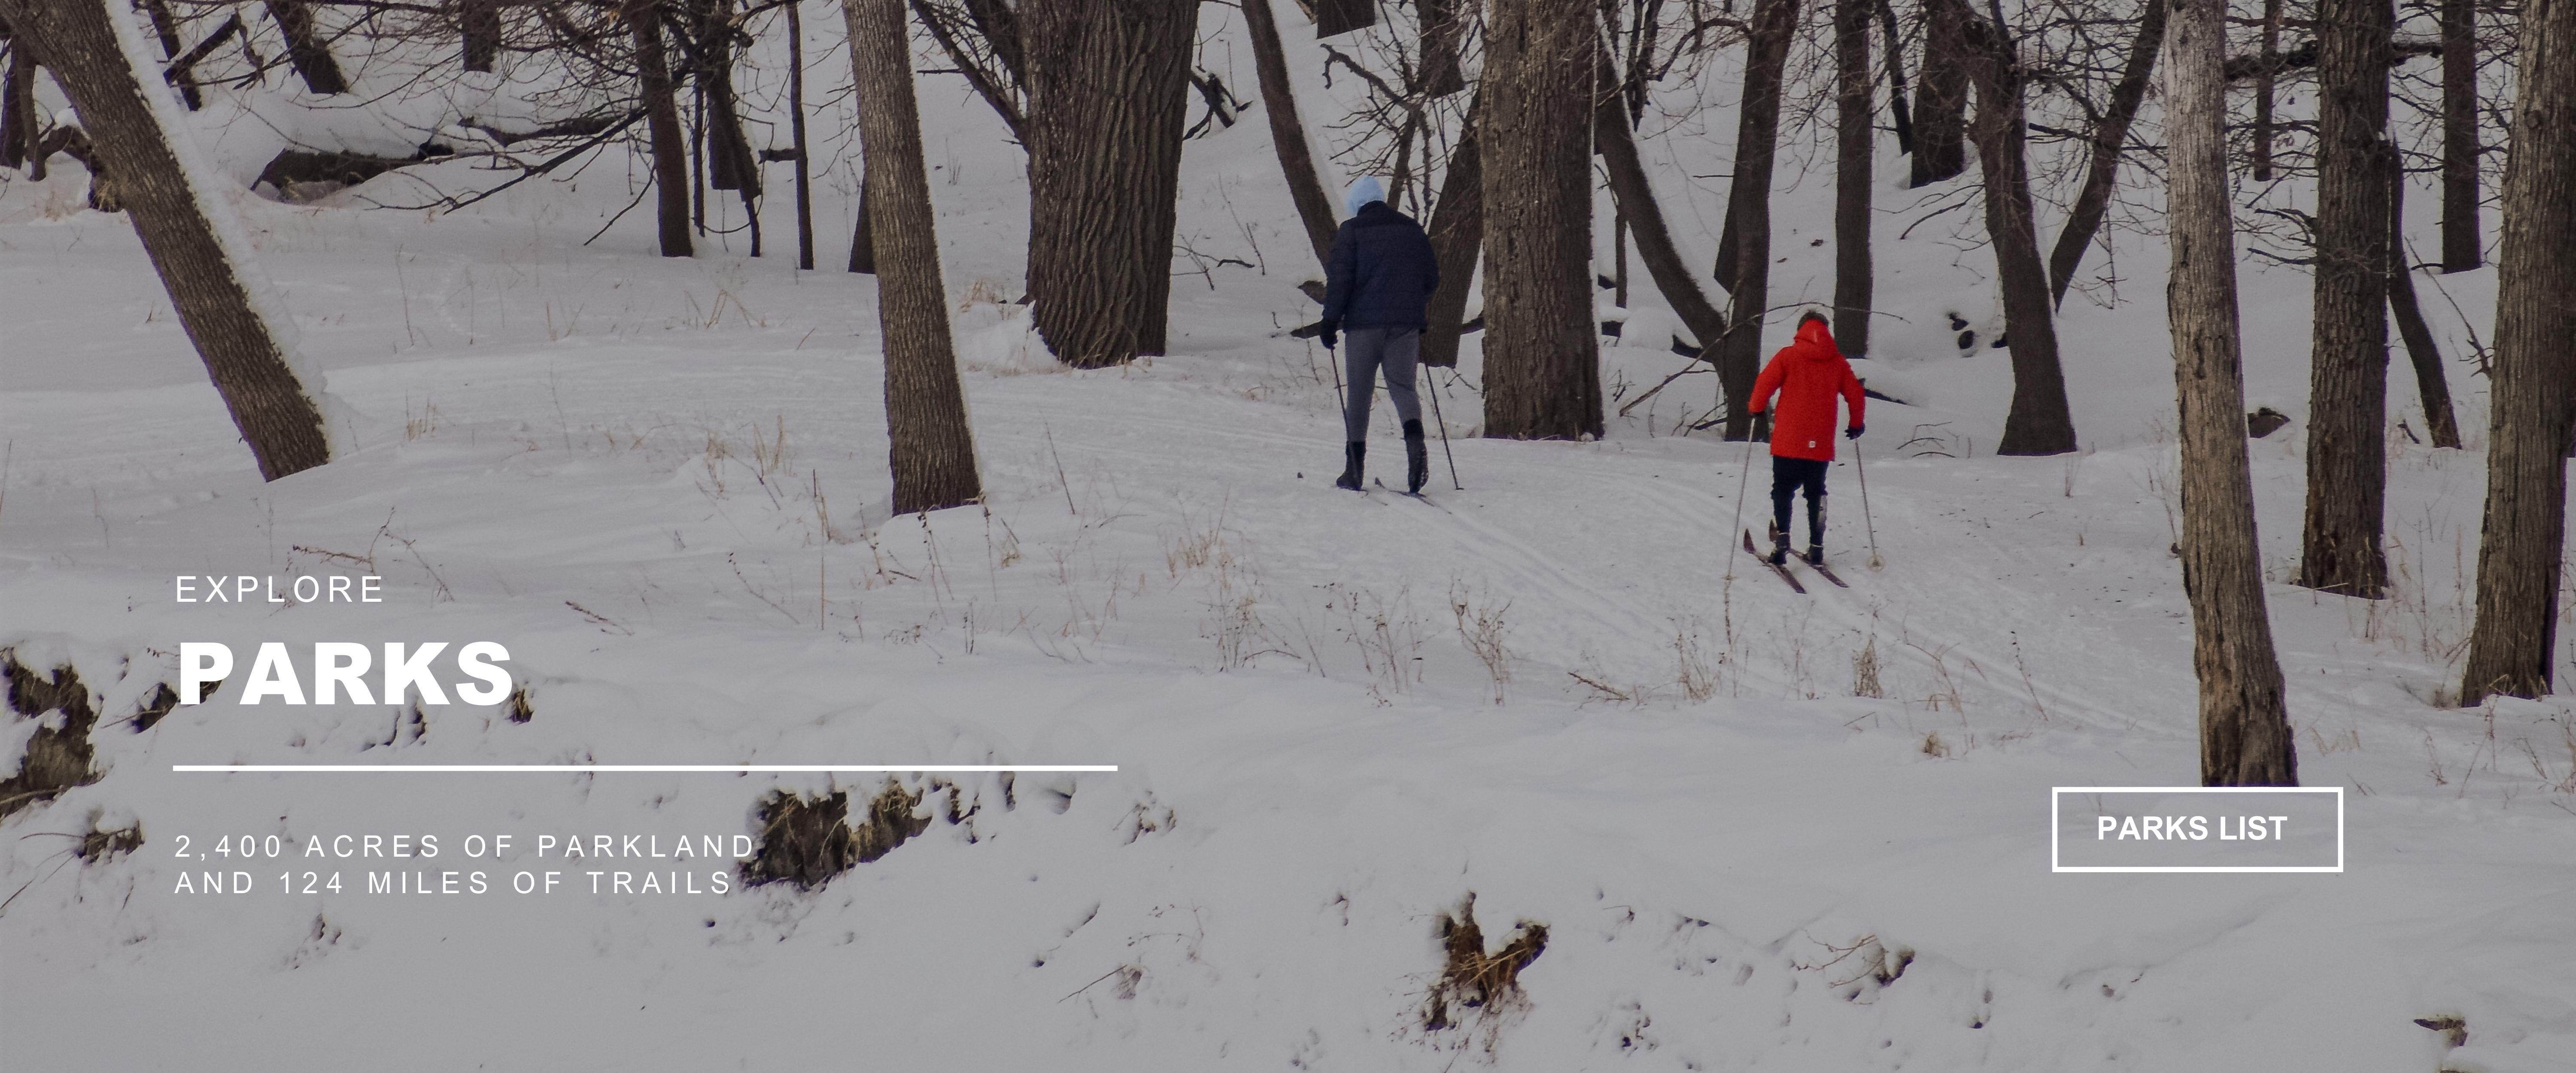 Explore PARKS - 2,400 acres of parkland and 124 miles of trails  - image of two people cross country skiing - one in a red winter coat the other in a navy blue coat with many trunks of trees in the background and snow on the ground - PARK LIST button